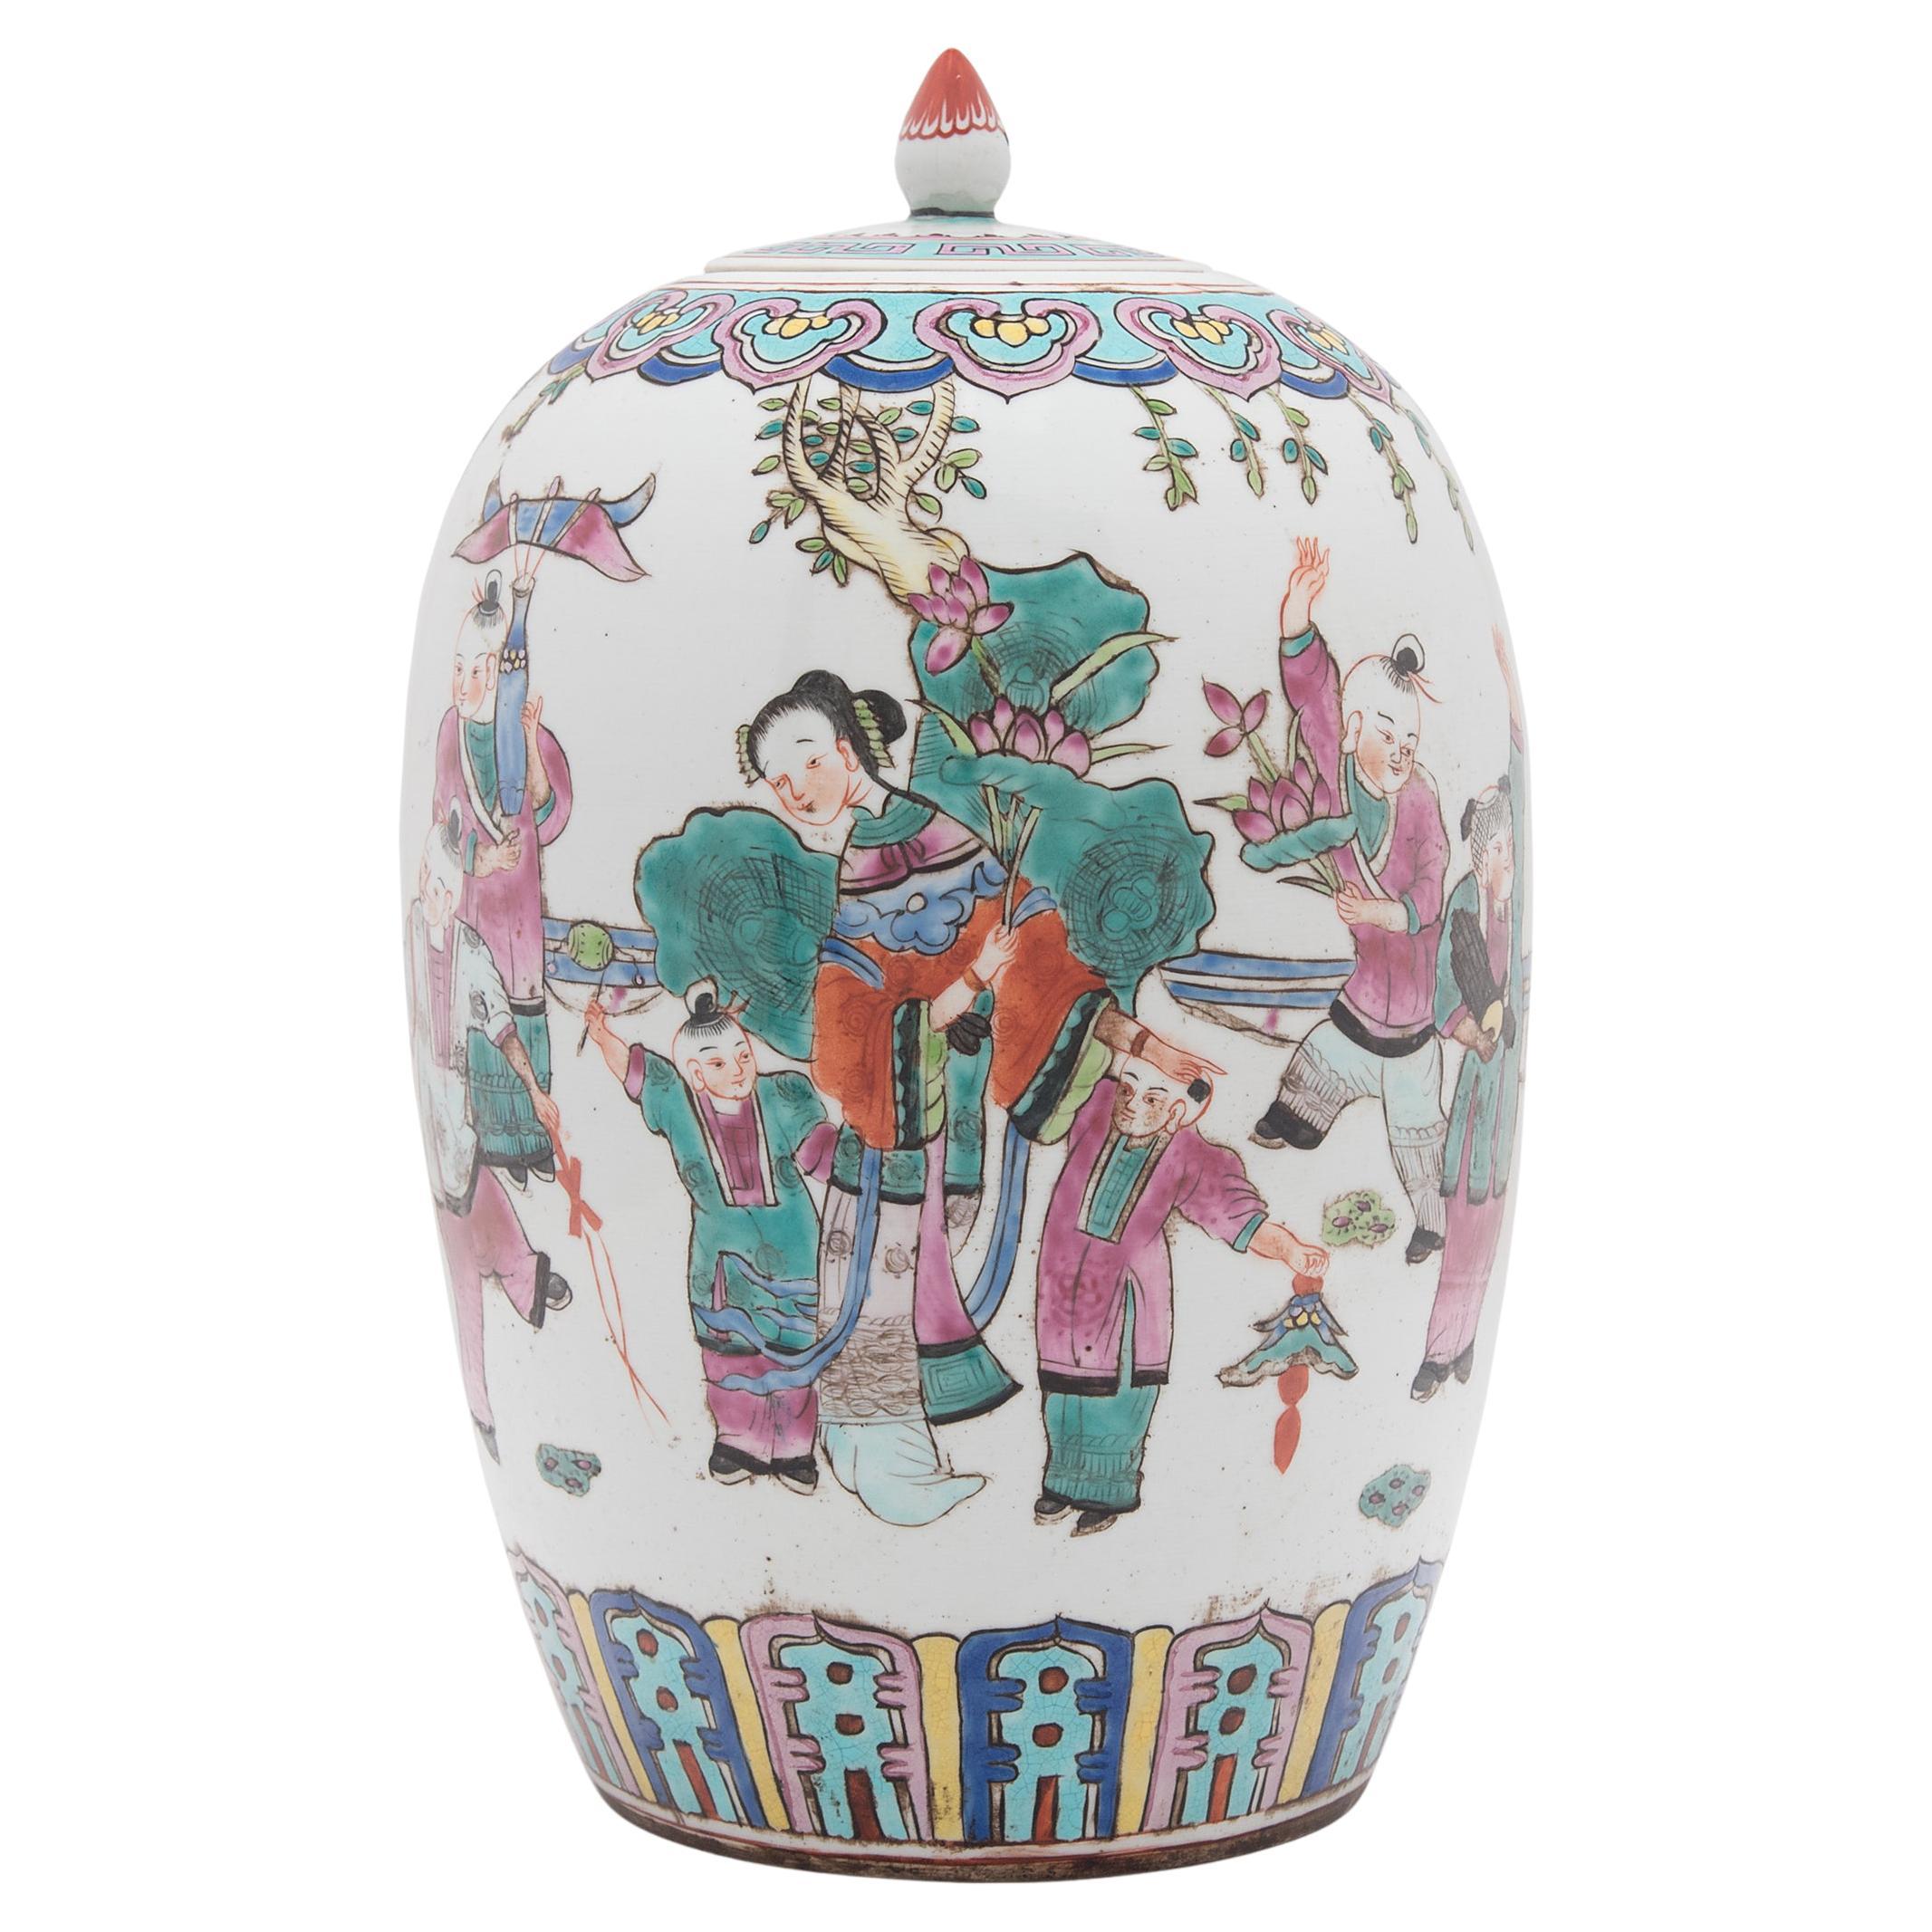 Chinese Famille Rose Ginger Jar with Boys at Play, c. 1900